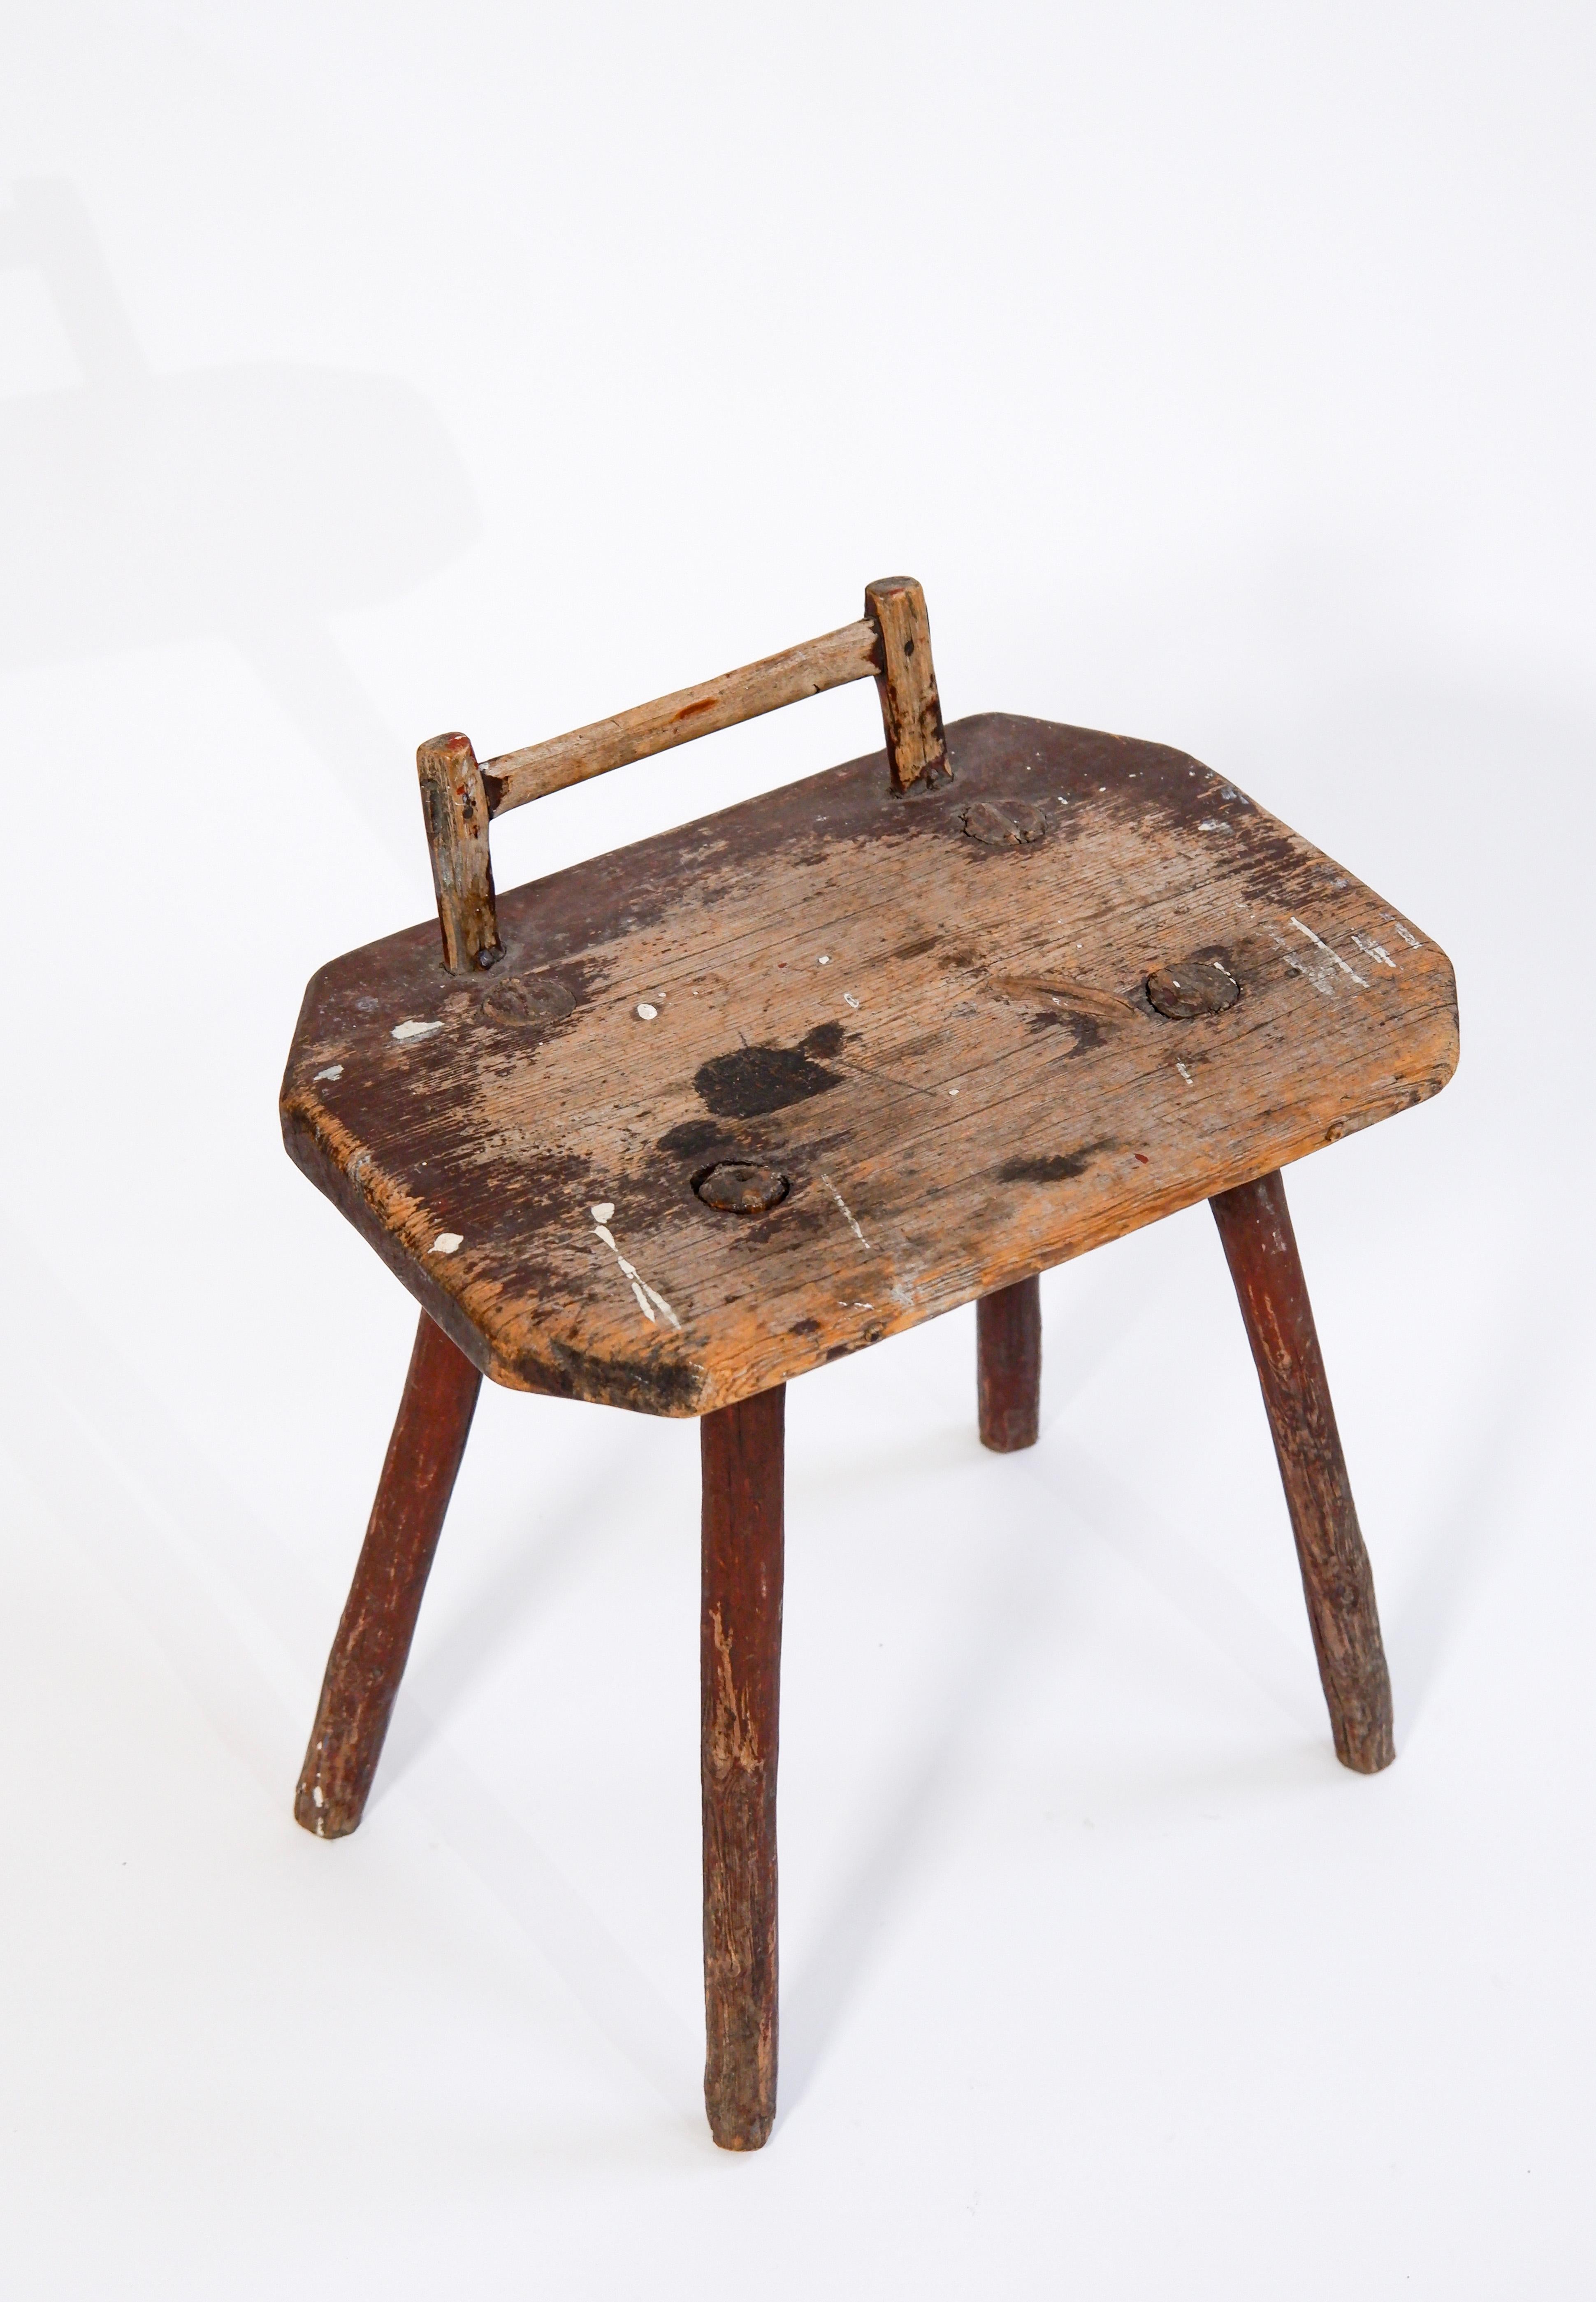 Swedish antic stool with a little high back, the stool has been probably made in the late XIX ème century. The stool has a strong patina but the stability is good. A foot has been glue back. This swedish antic berger style has inspired many later